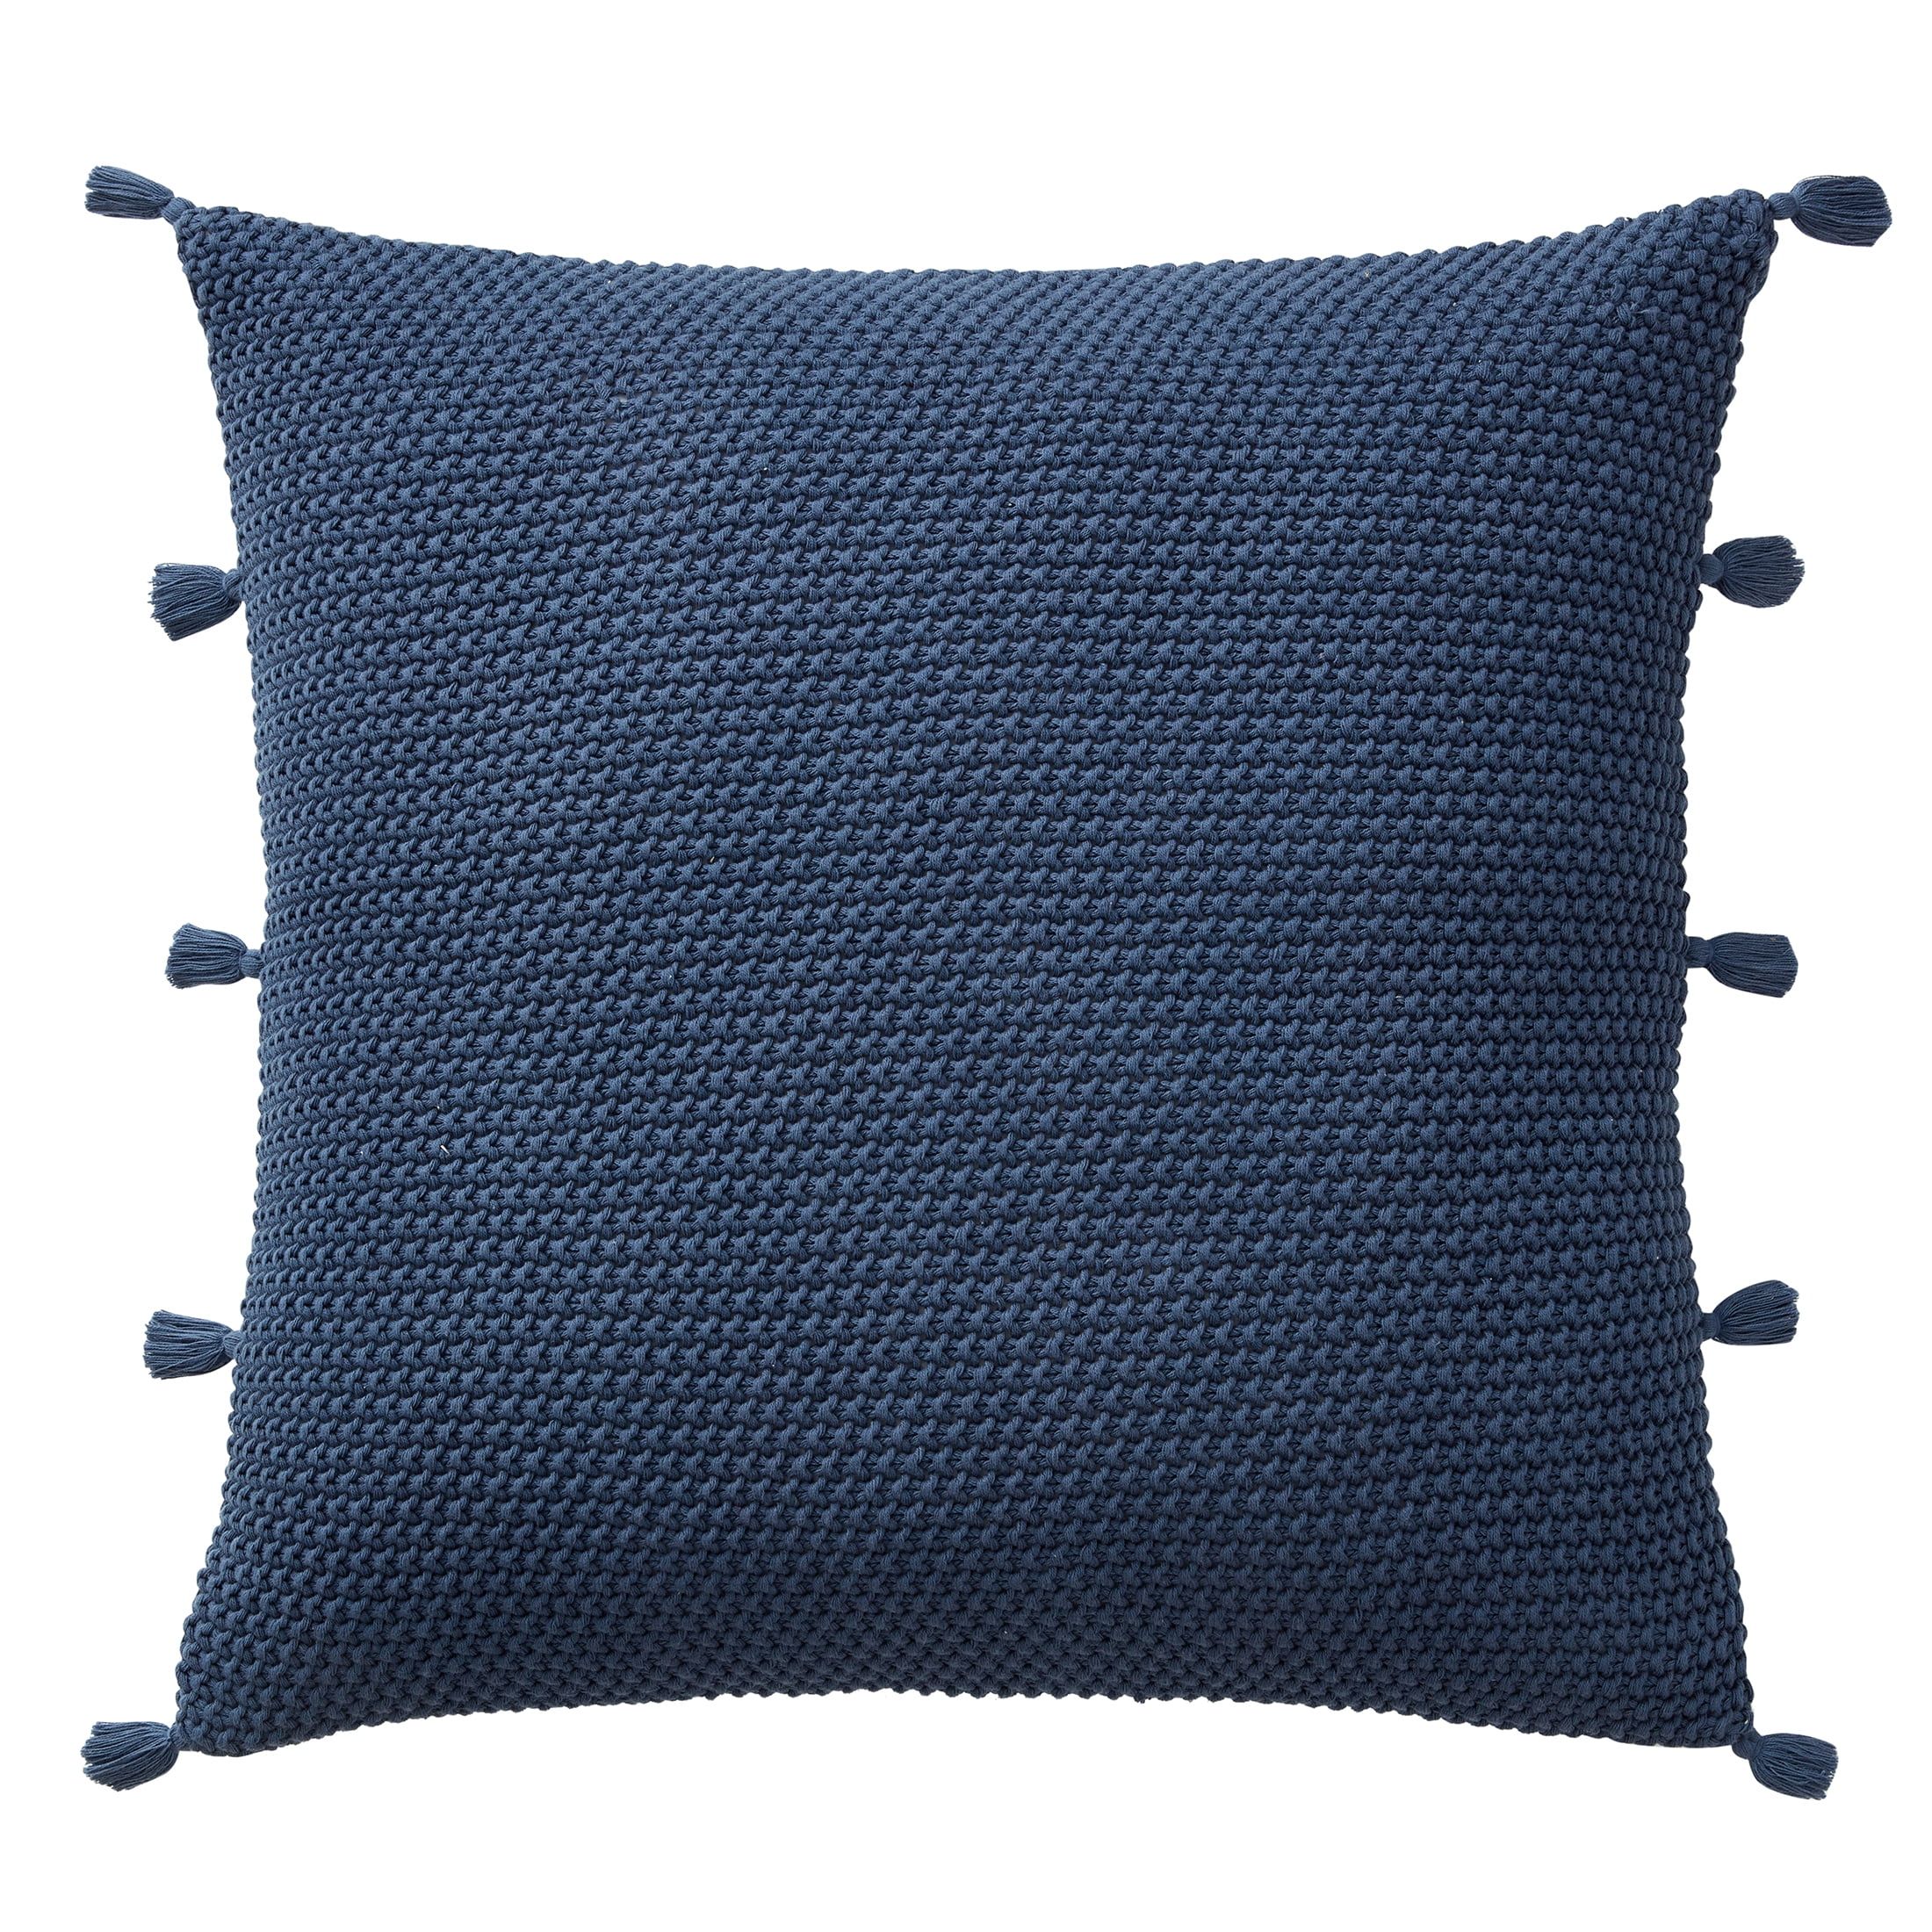 My Texas House Sophia Sweater Knit Decorative Pillow Cover, 20" x 20", Navy | Walmart (US)